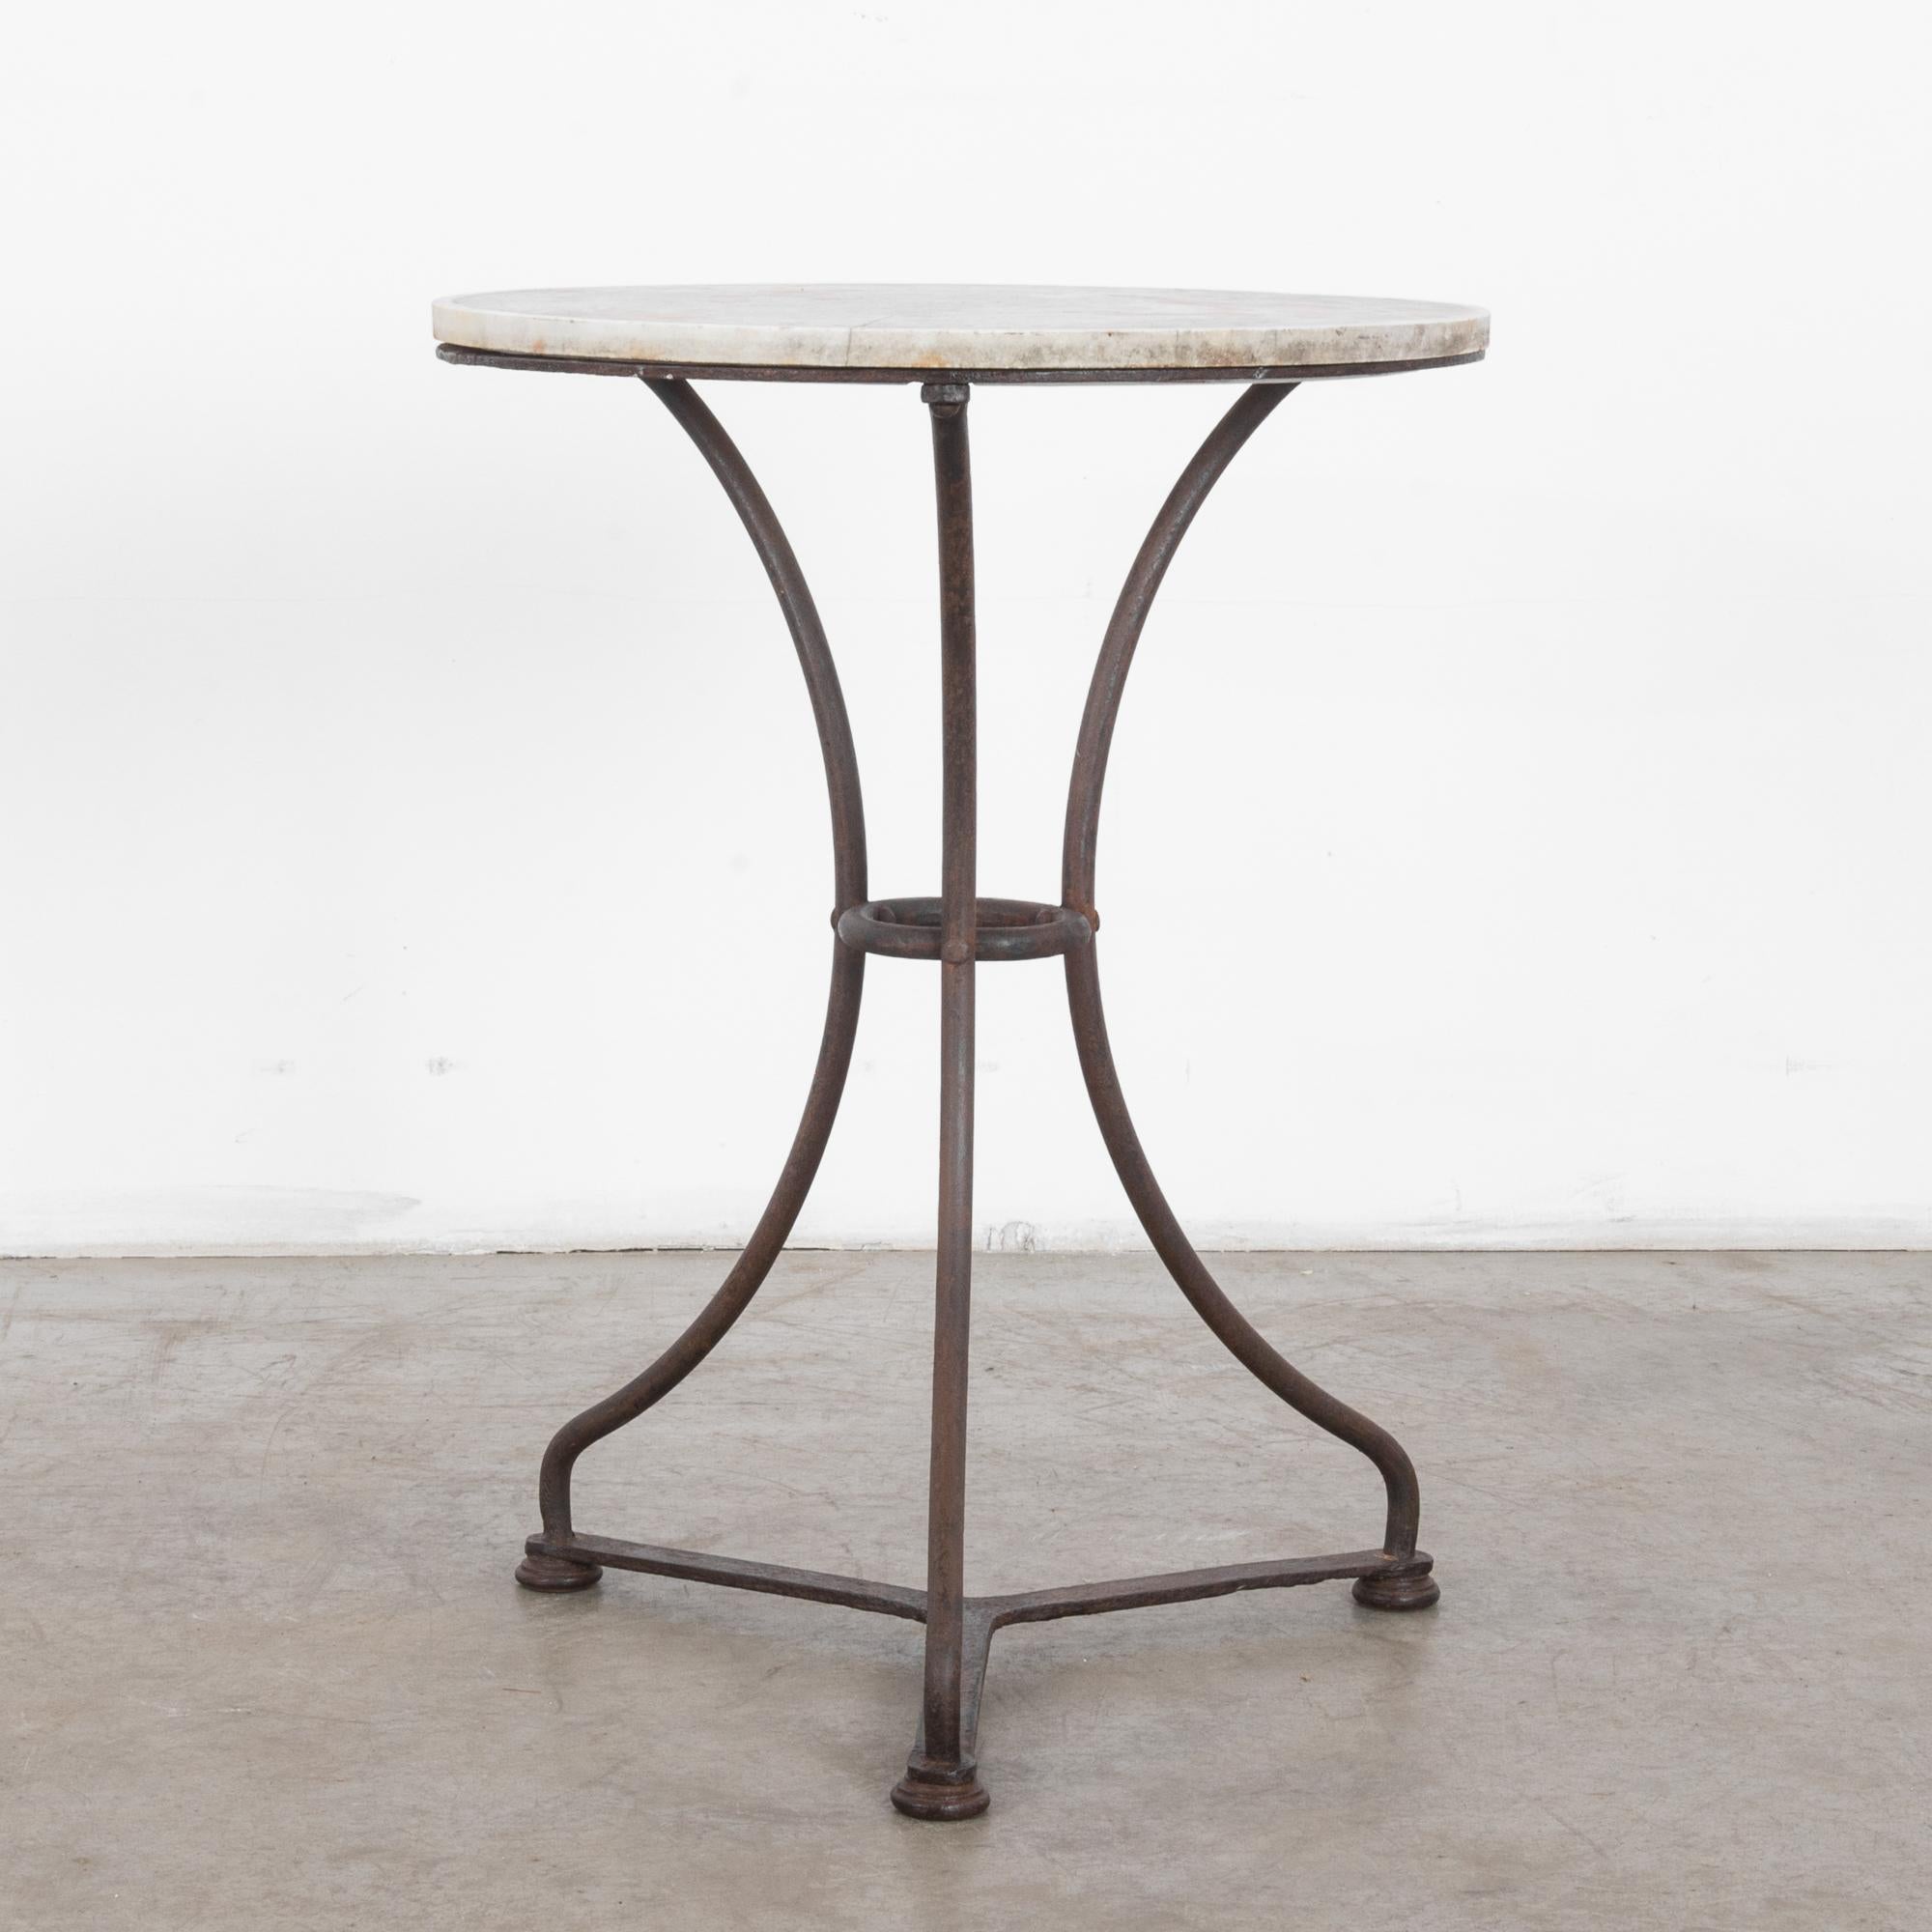 This side table with an elegant three-legged, curved iron frame was made in France. The round, gray-white marble top features variegated patterns and a timeworn patina. This table is an elegant example of the shifts in table design from around the